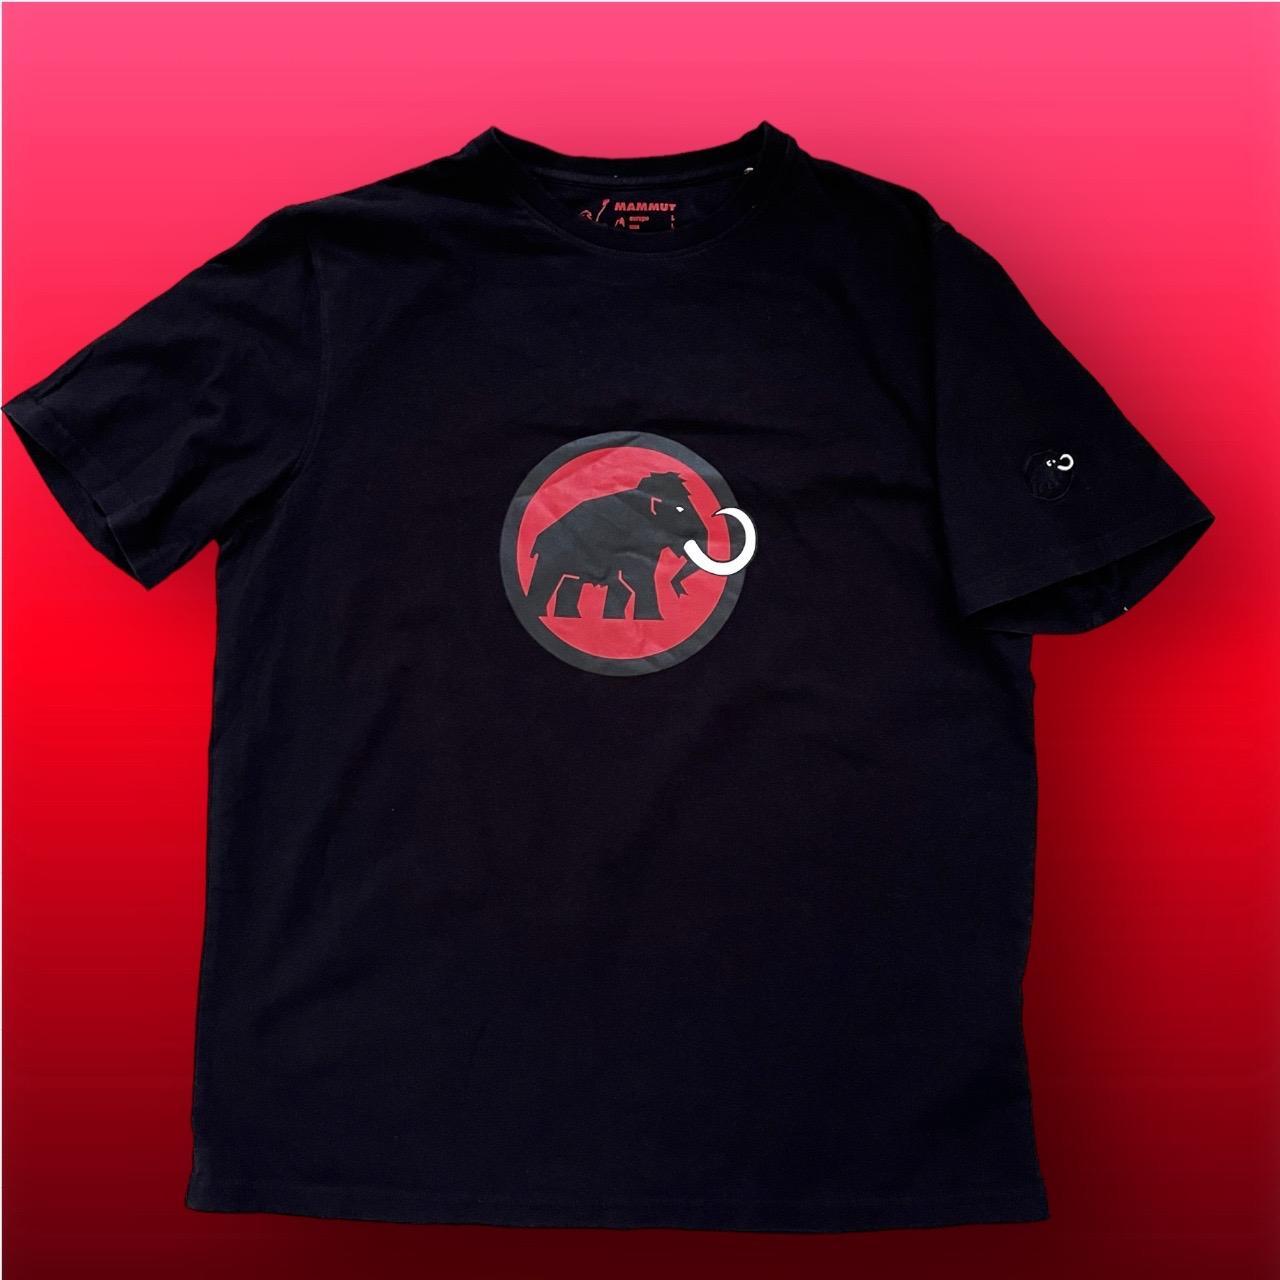 Mammut Men's Black and Red T-shirt